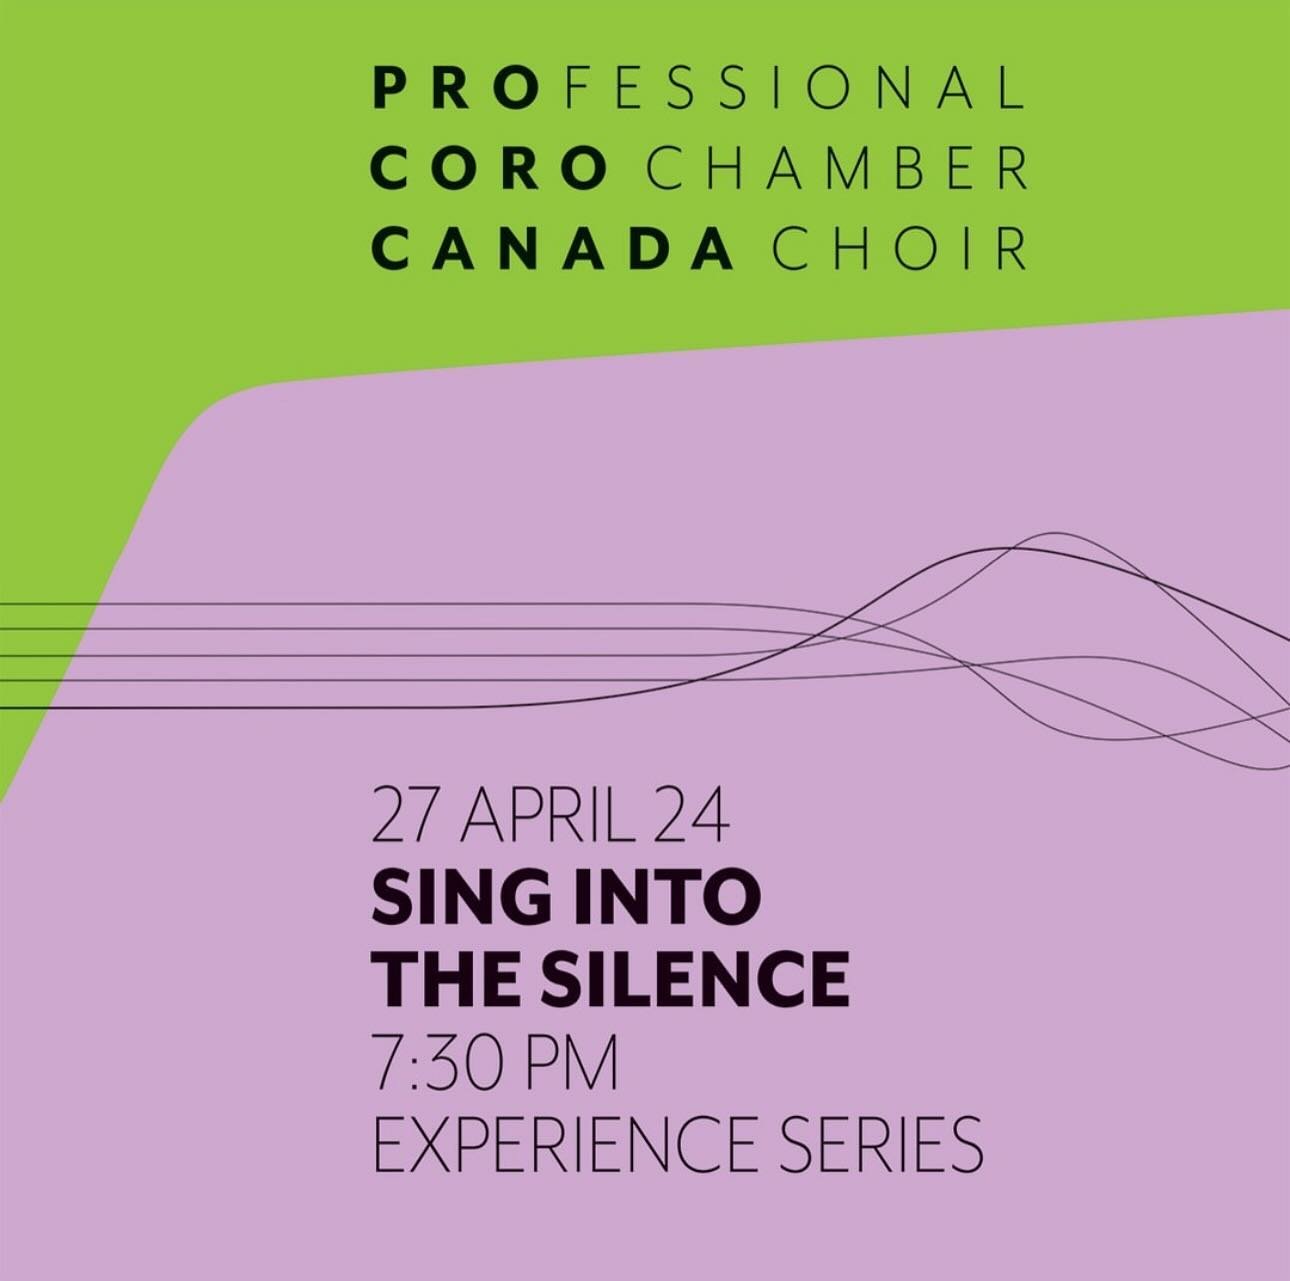 📢 🎶 Our Resound &amp; Youth choirs will be joining Pro Coro Canada for this exciting concert on April 24th! 

 in-person &amp; livestream tickets available - see details below 💛

&mdash; 
REPOST

Listen to the combined sonorities with the&nbsp;@ey